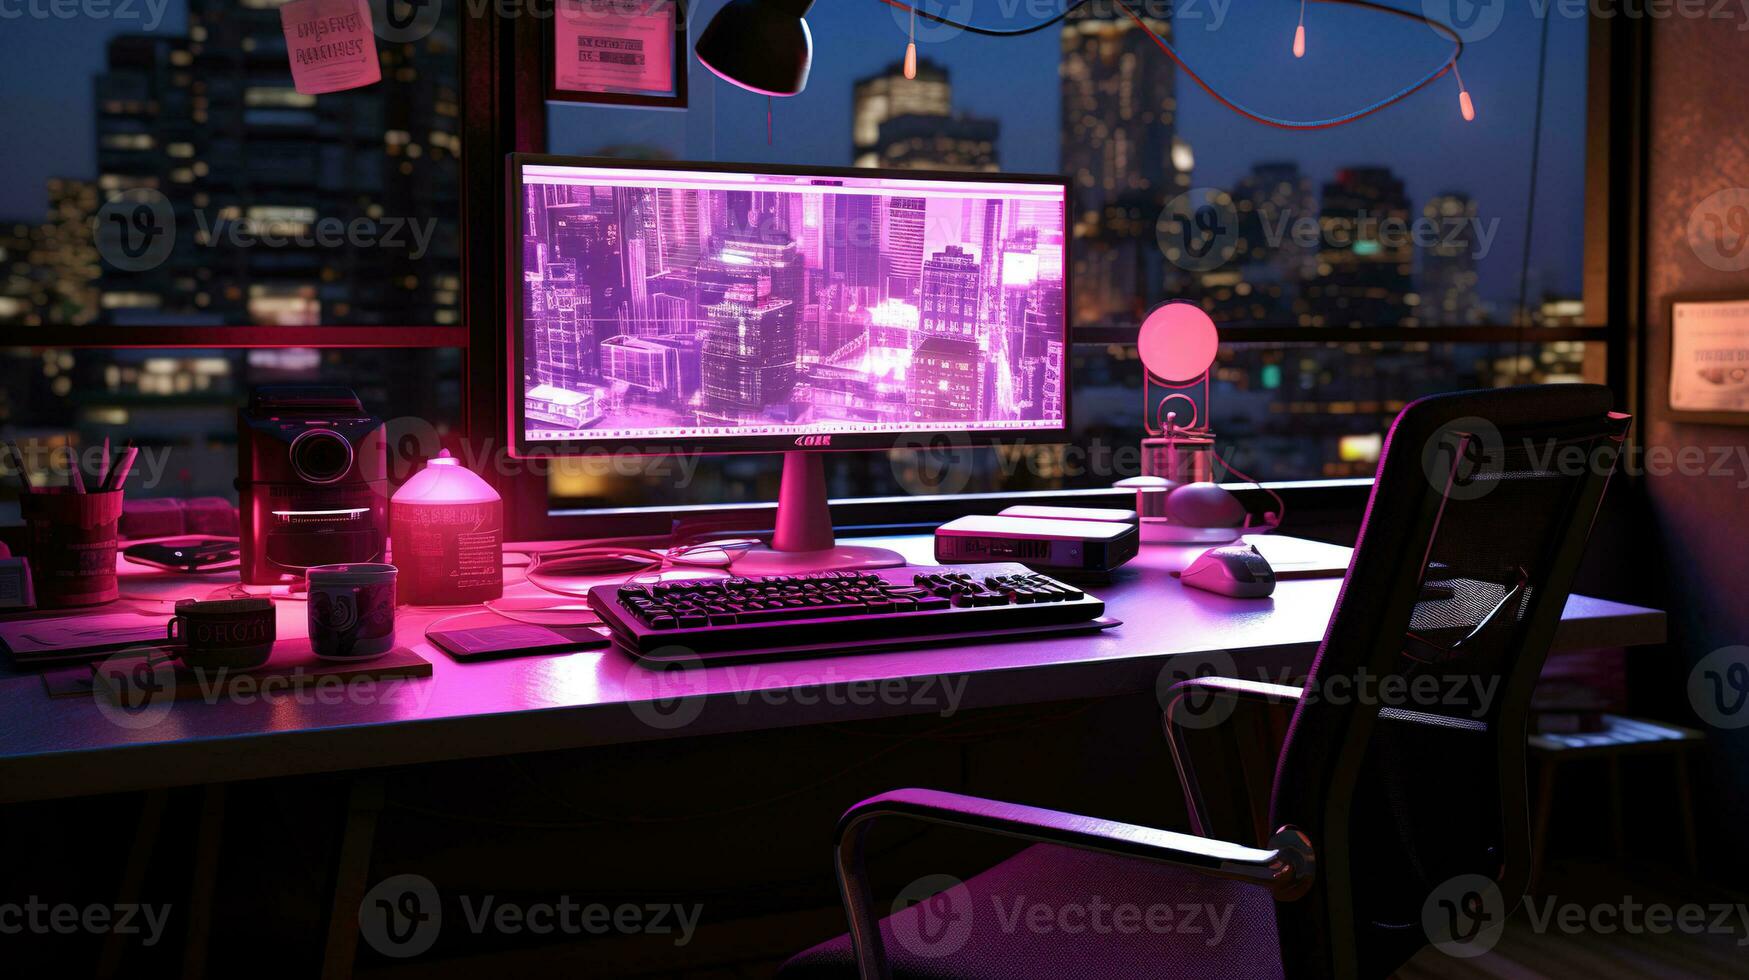 https://static.vecteezy.com/system/resources/previews/032/426/794/non_2x/generative-ai-computer-on-the-table-in-cyberpunk-style-nostalgic-80s-90s-neon-night-lights-vibrant-colorsrealistic-horizontal-illustration-of-the-futuristic-interior-technology-concept-photo.jpg